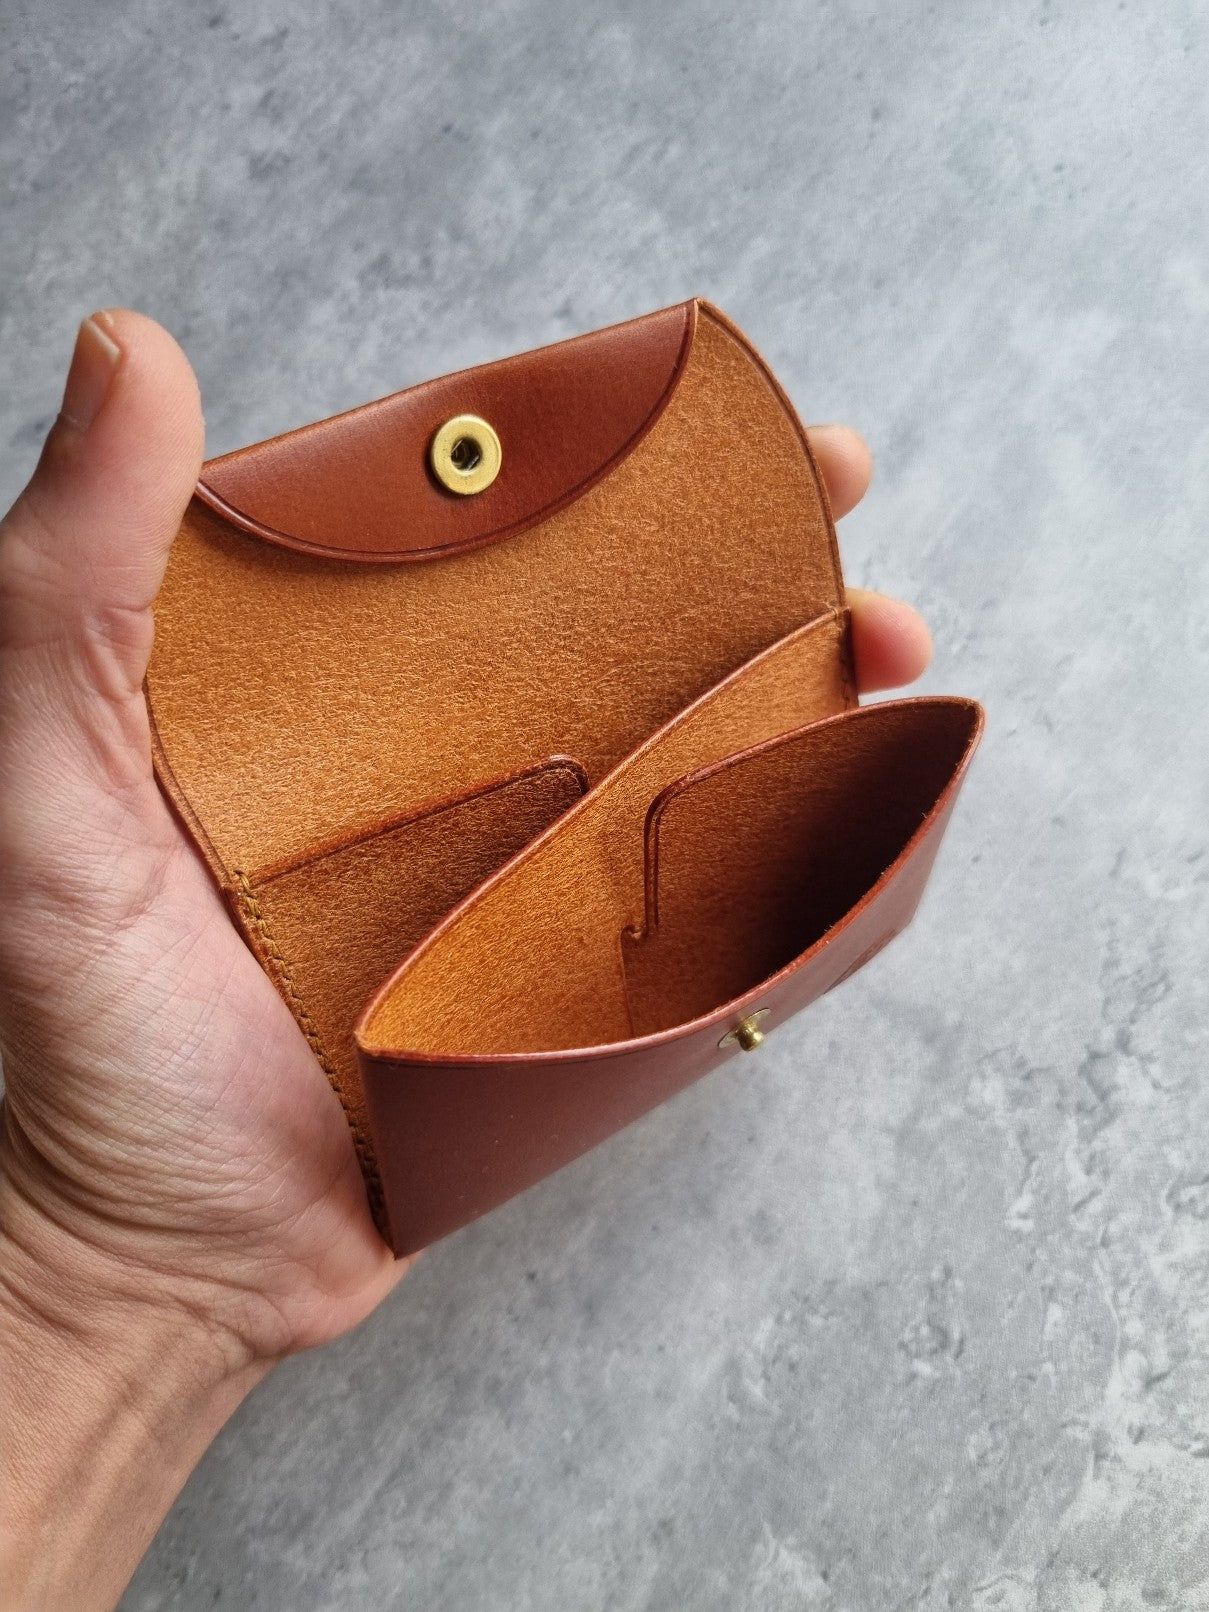 The Crossover wallet | DIY | Pattern Pdf | Leather craft template